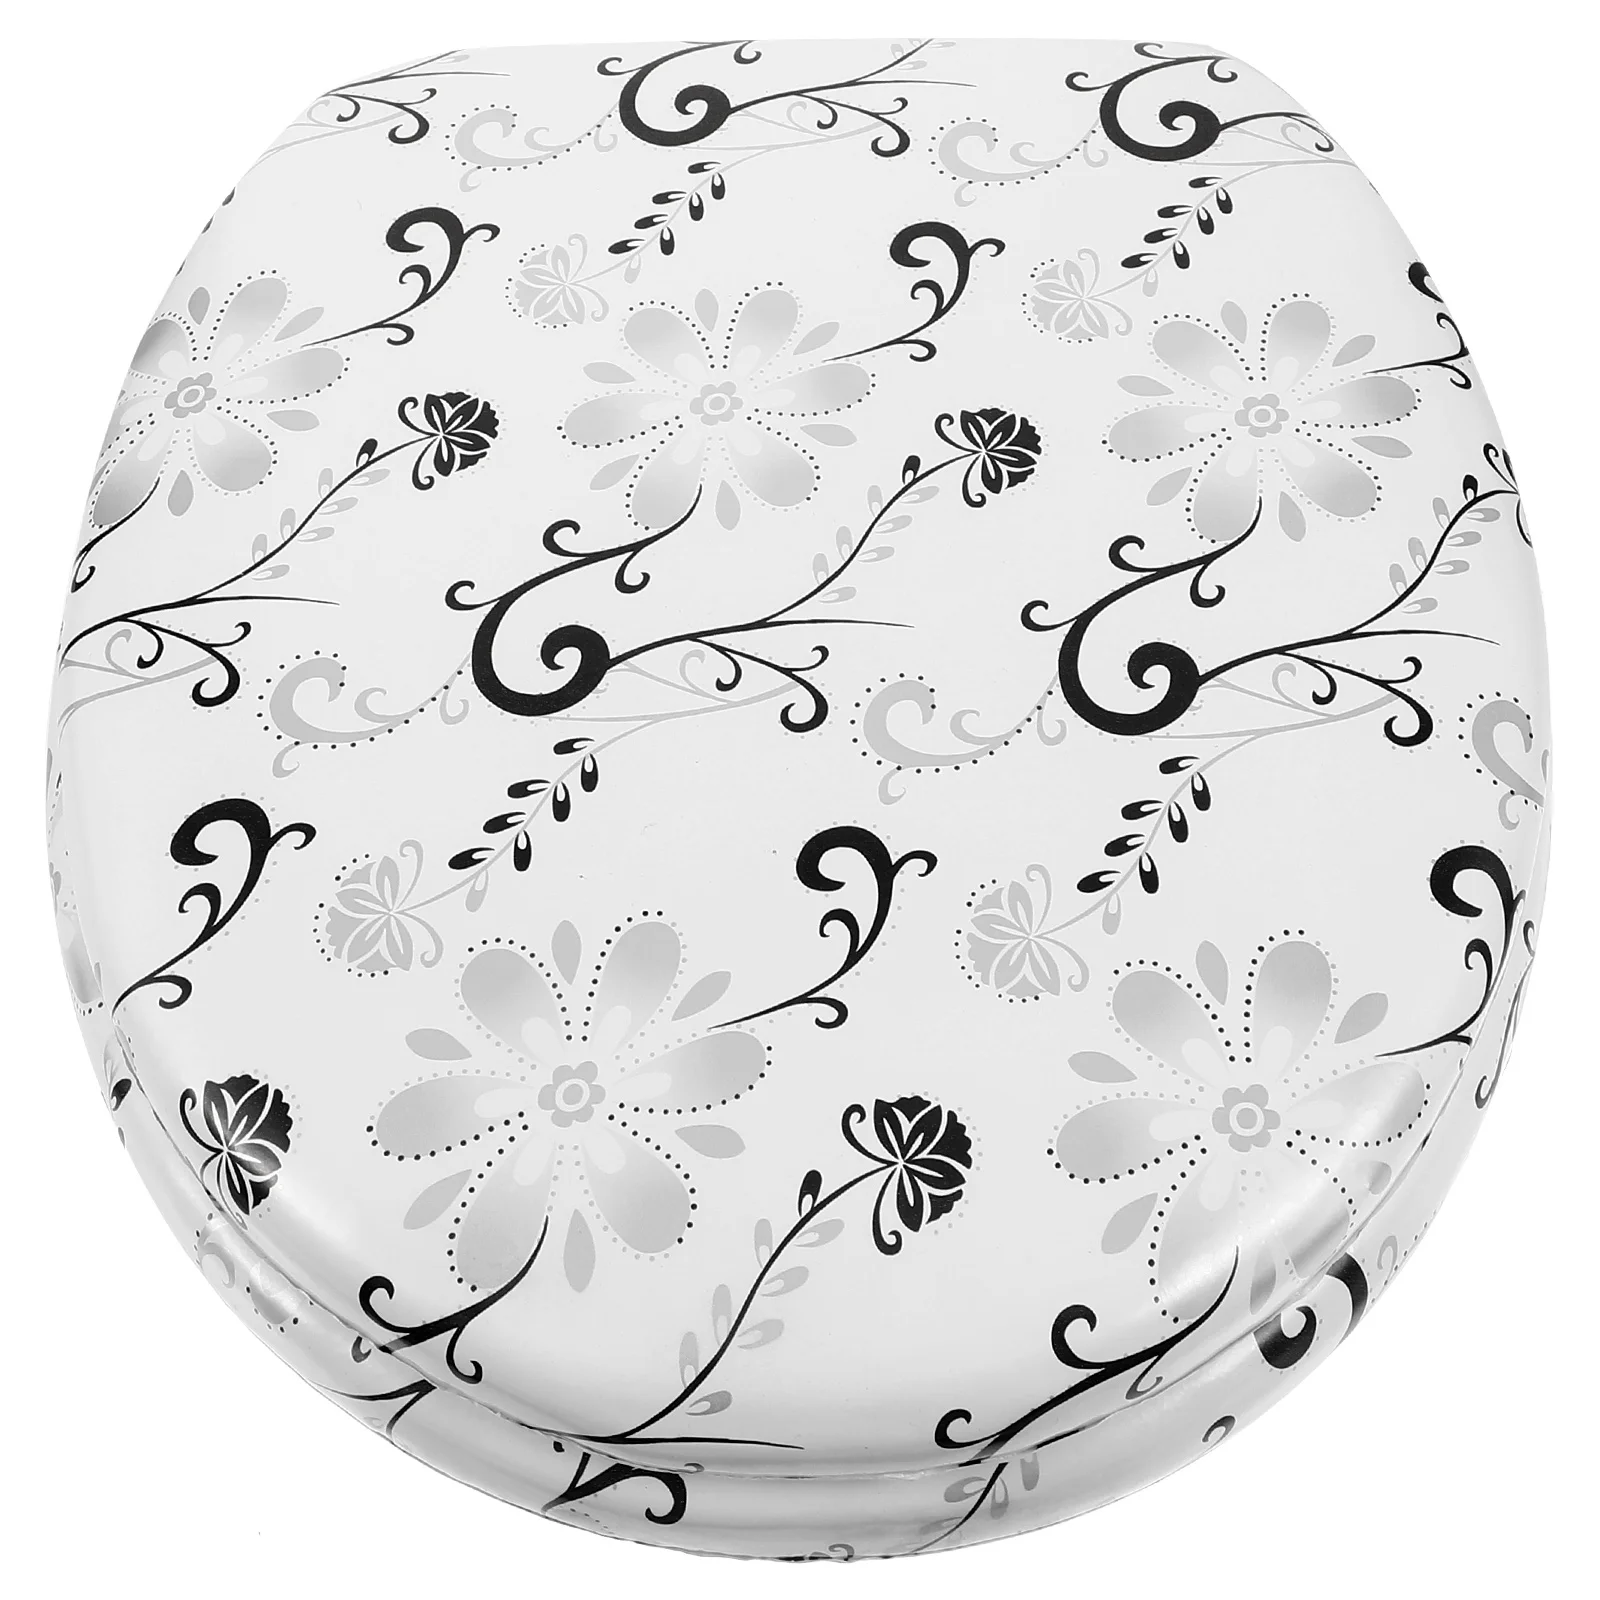 

Toilet Seat Bathroom Lid Cover Thicken Mat Silica Gel Warmer Domestic Pad Child Washable